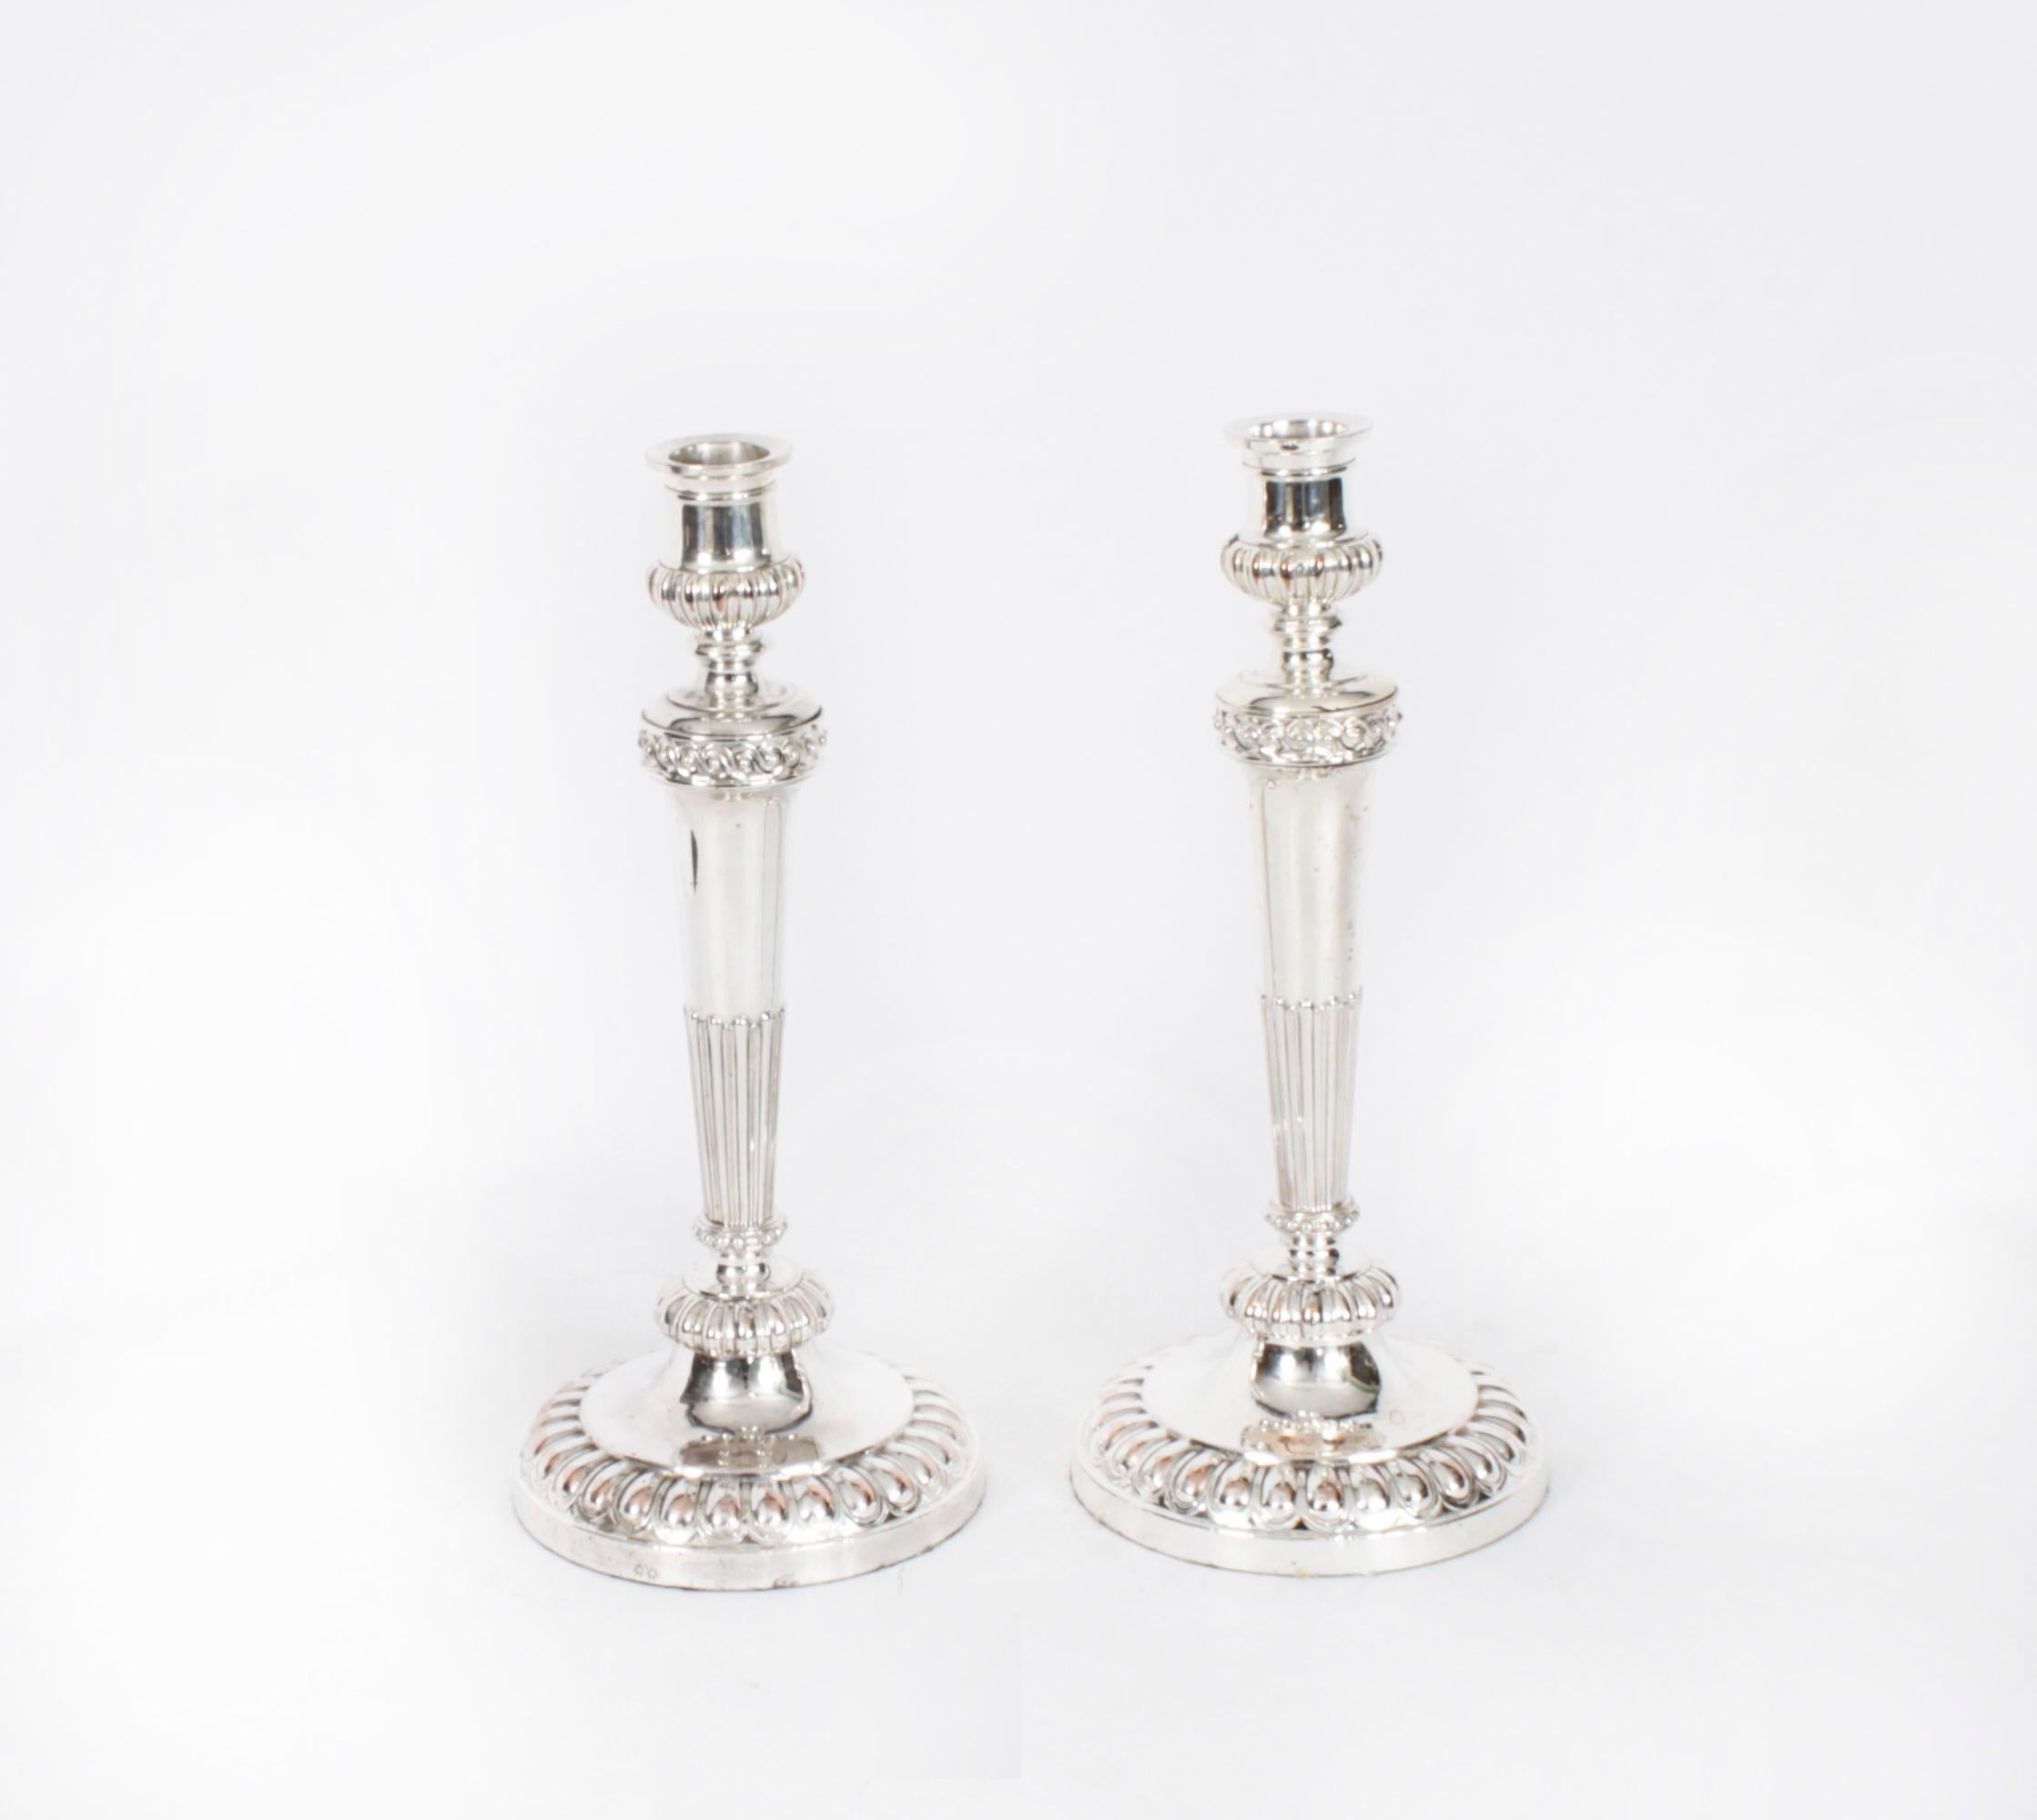 This is a stunning monumental pair of antique English Old Sheffield silver on copper, three light, two-branch table candelabra, circa 1790 in date, and bearing the sunburst makers marks of the world renowned silversmith Matthew Boulton.

The